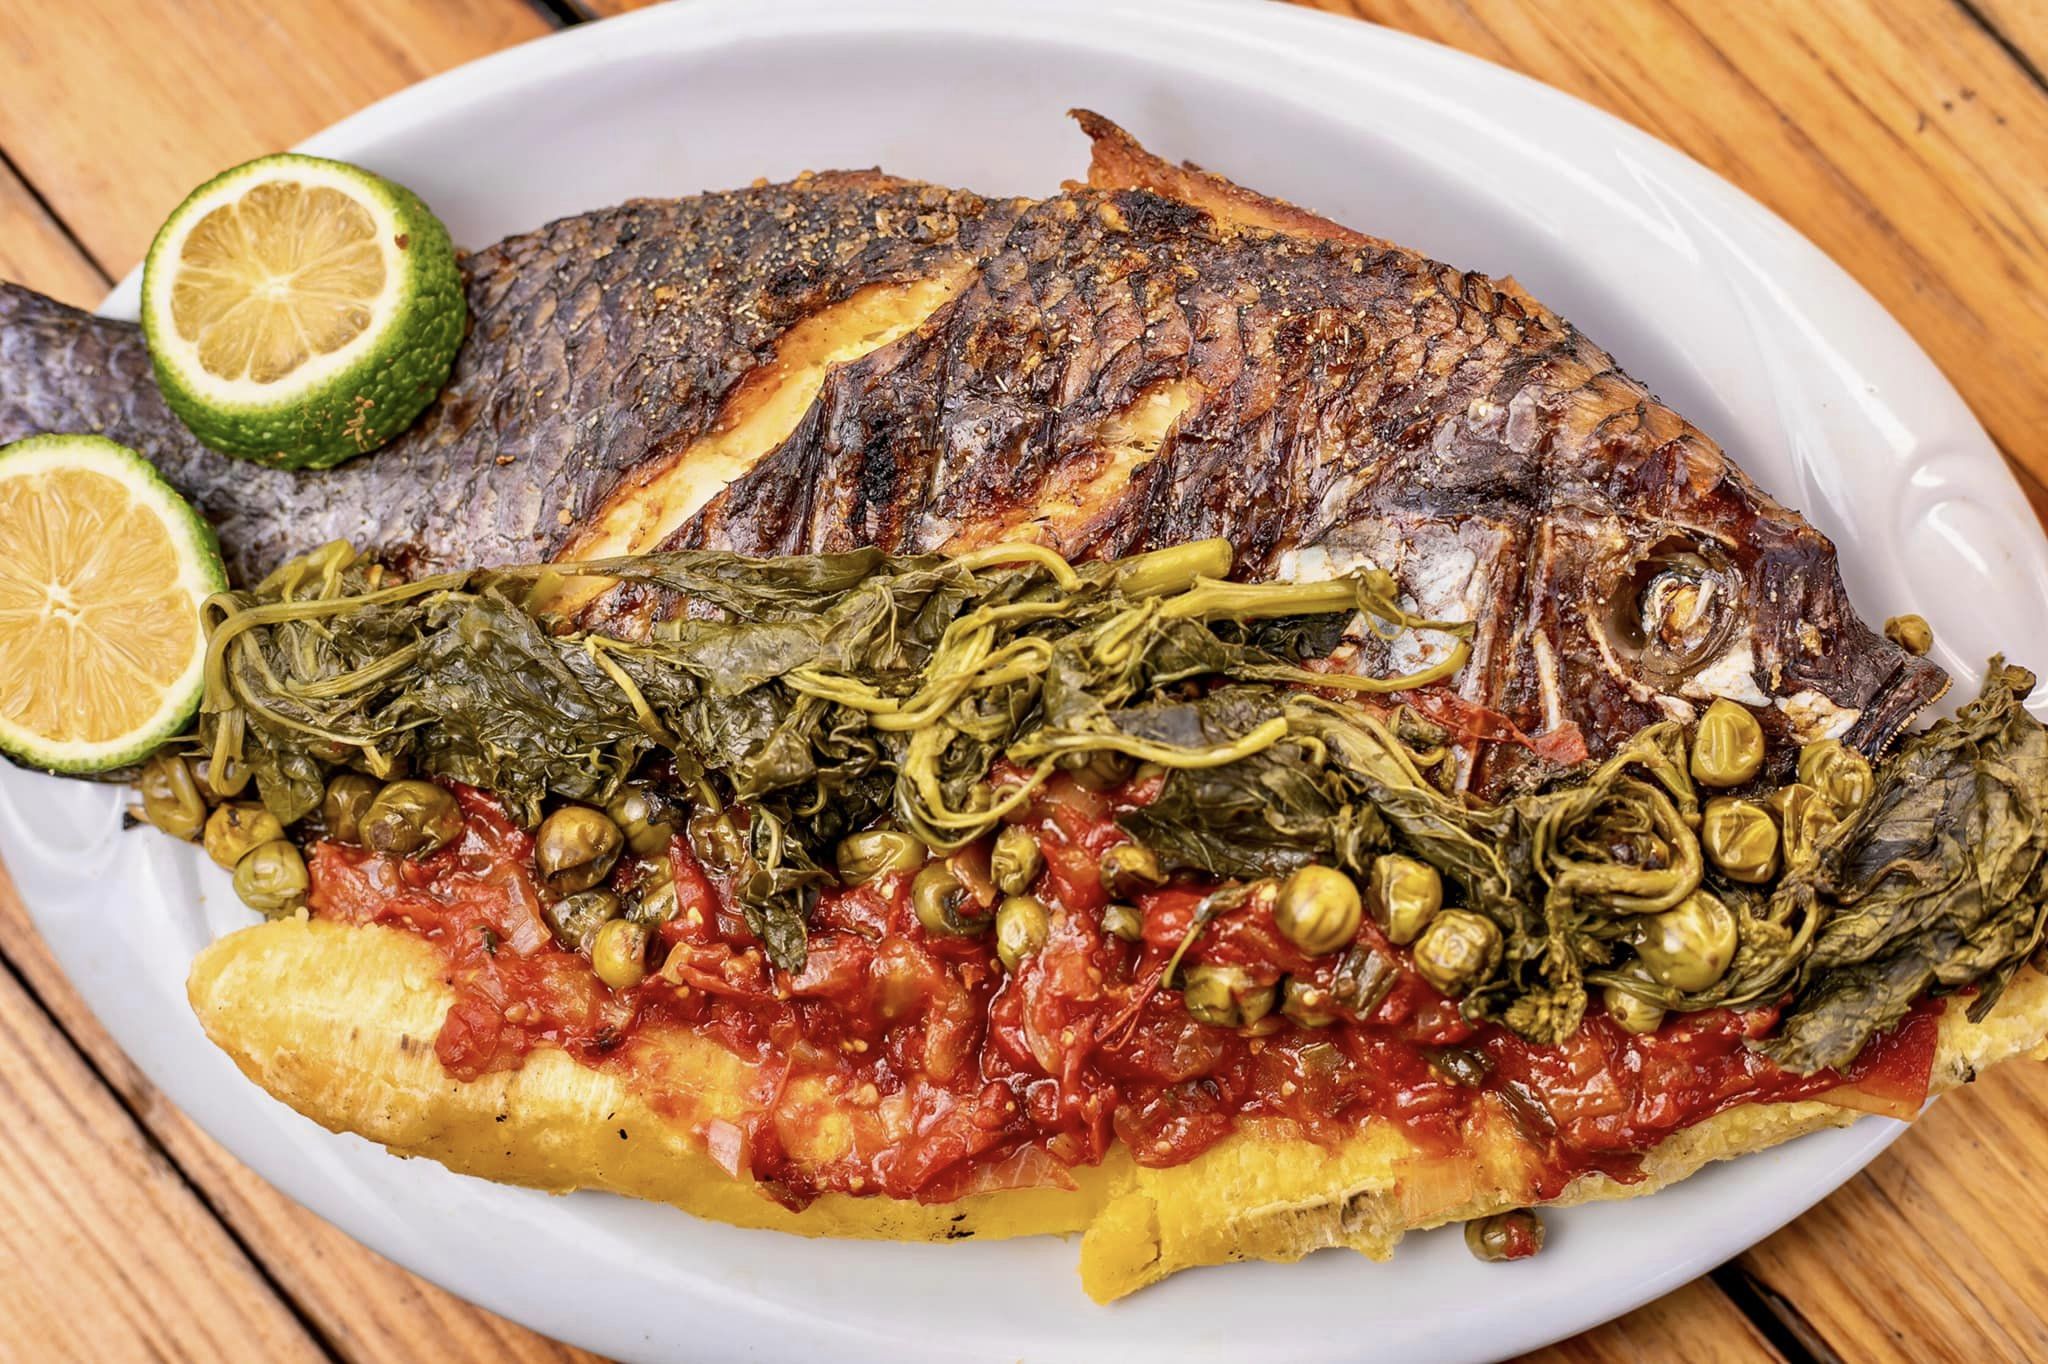 Grilled Whole Tilapia with a side of veges and plantain Ugandan Cuisine